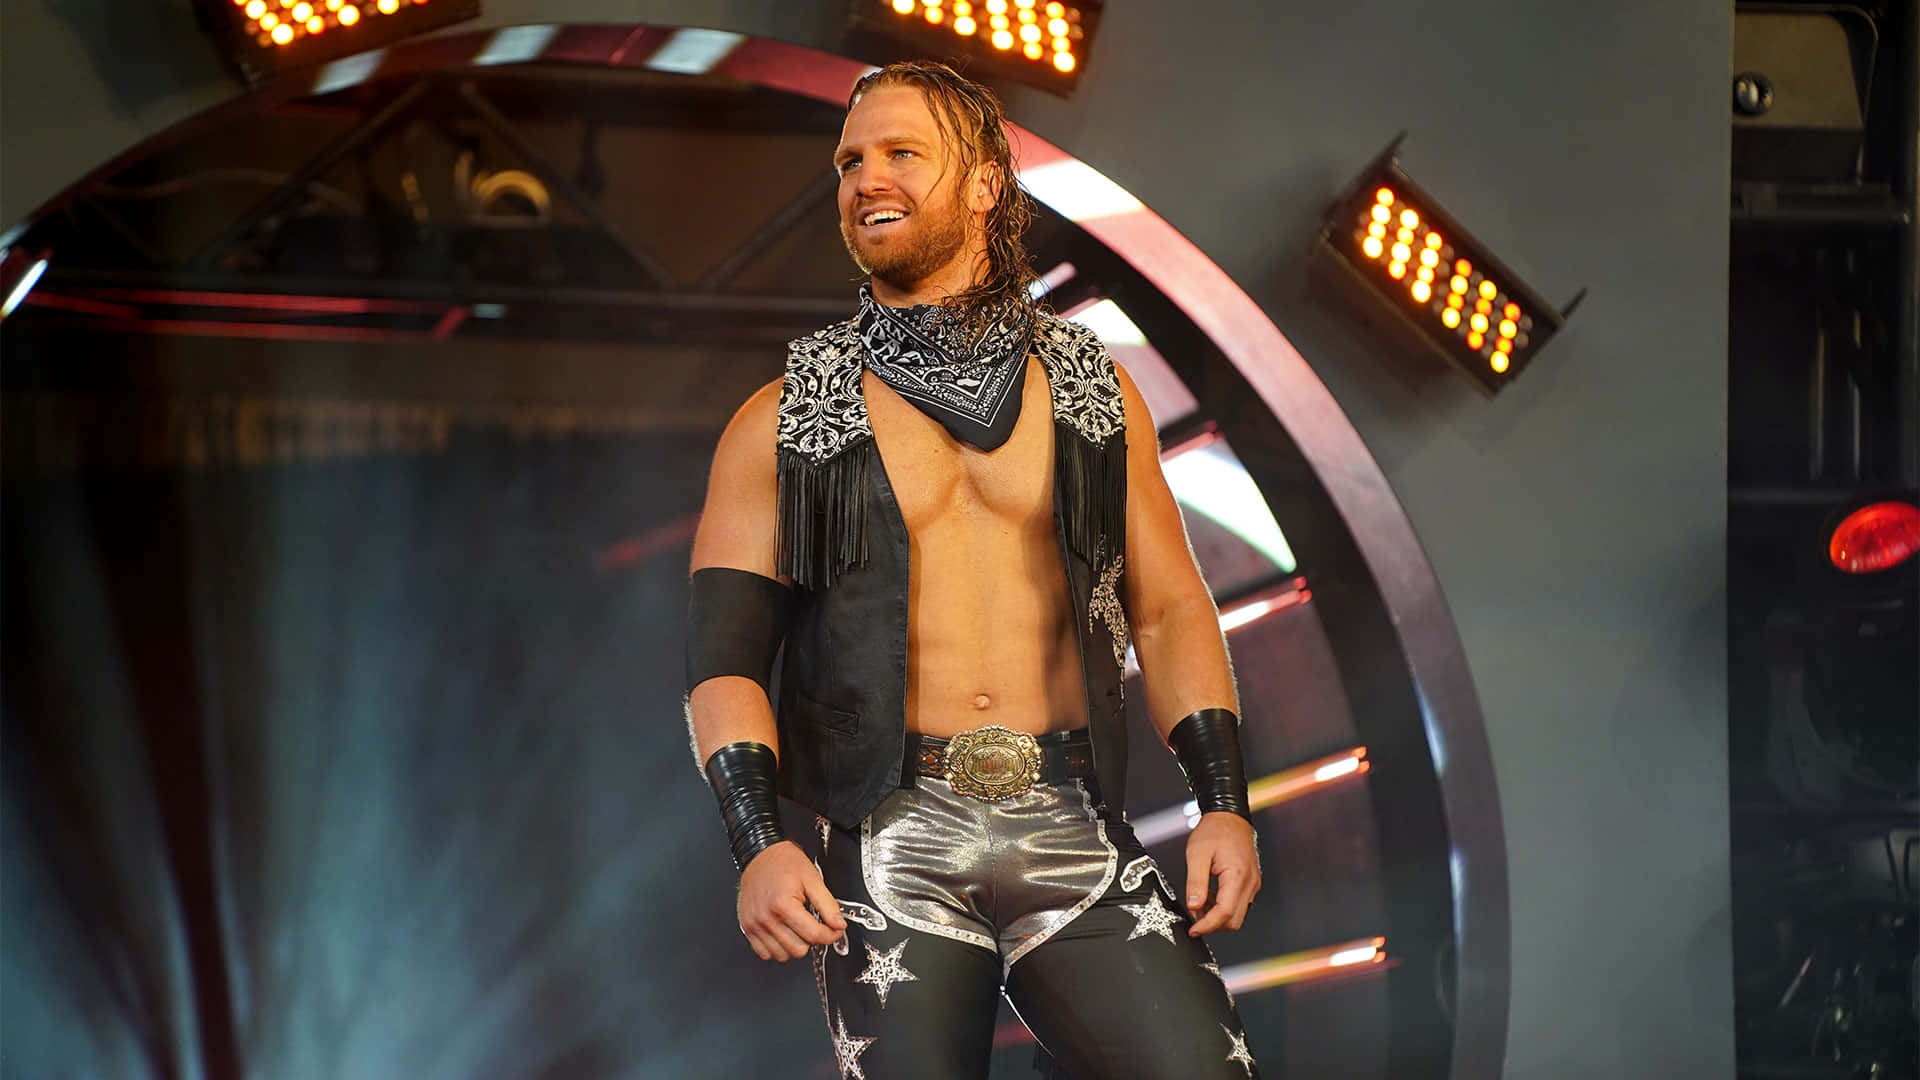 Adam Page Wearing Cowboy Outfit Wallpaper